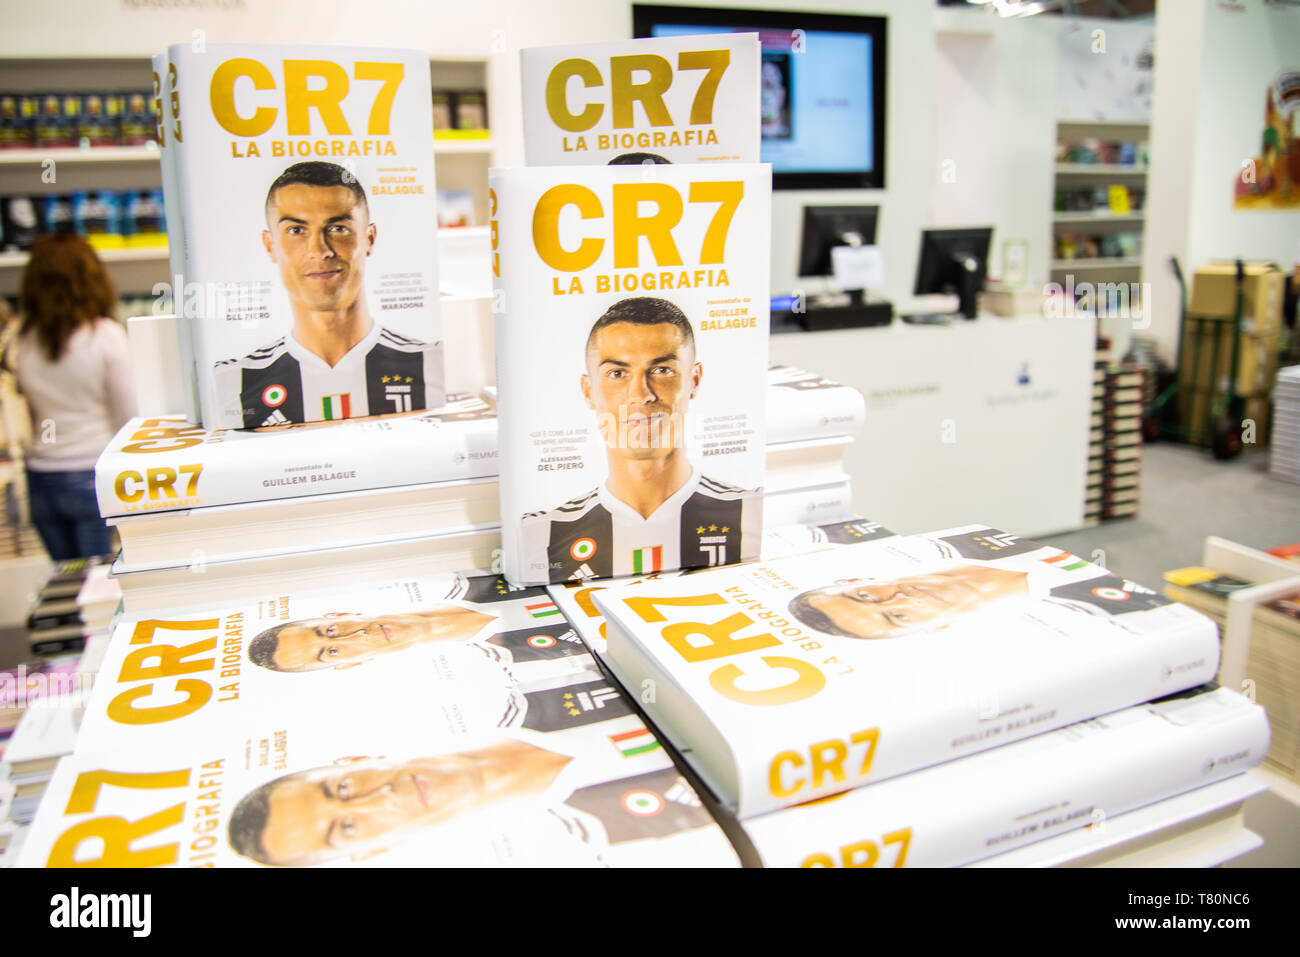 Turin, Turin, Italy. 9th May, 2019. The book of Cristiano Ronaldo depicted during the event.The International Book Fair is the most important Italian event in the publishing field. It takes place at the Lingotto Fiere conference centre in Turin once a year, in the month of May. Credit: Diego Puletto/SOPA Images/ZUMA Wire/Alamy Live News Stock Photo